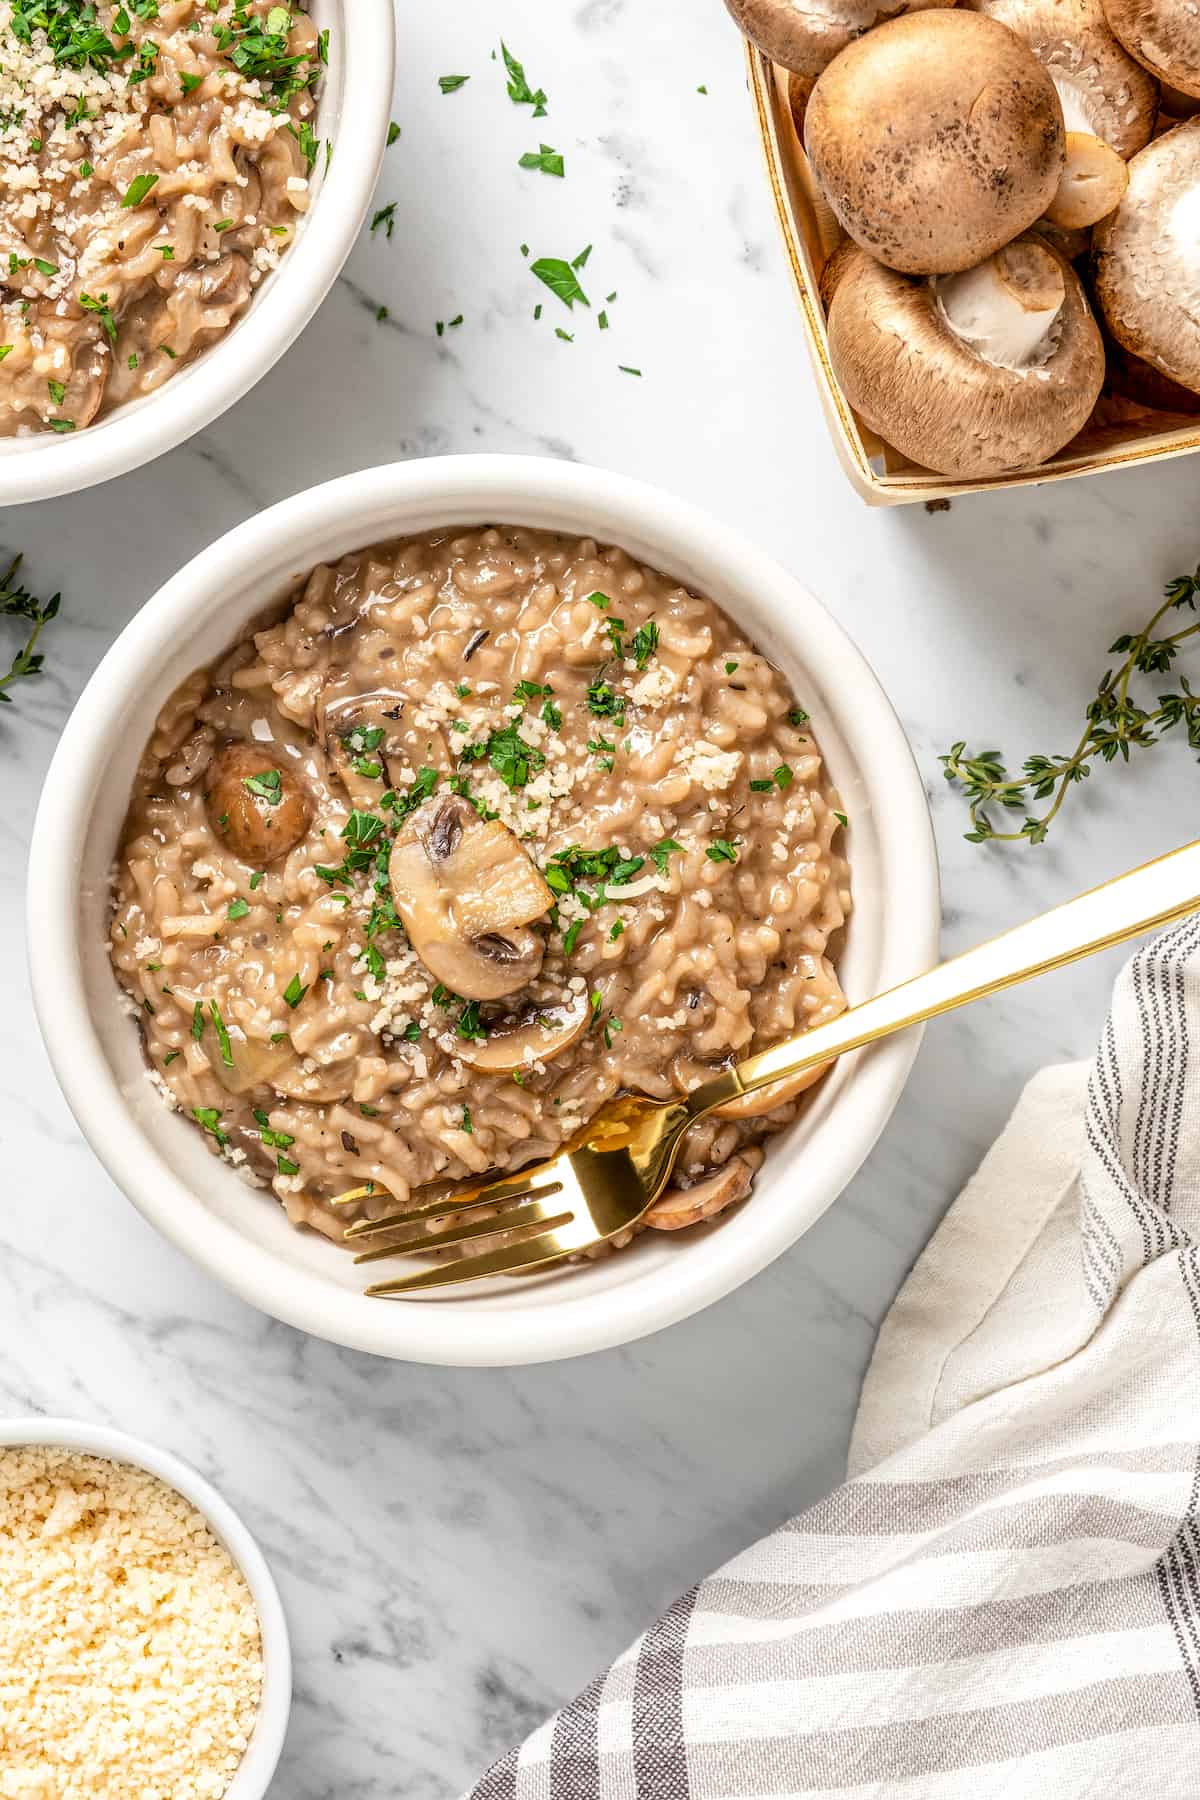 Overhead view of vegan risotto in bowl with carton of mushrooms, tea towel, herbs, and bowl of parmesan